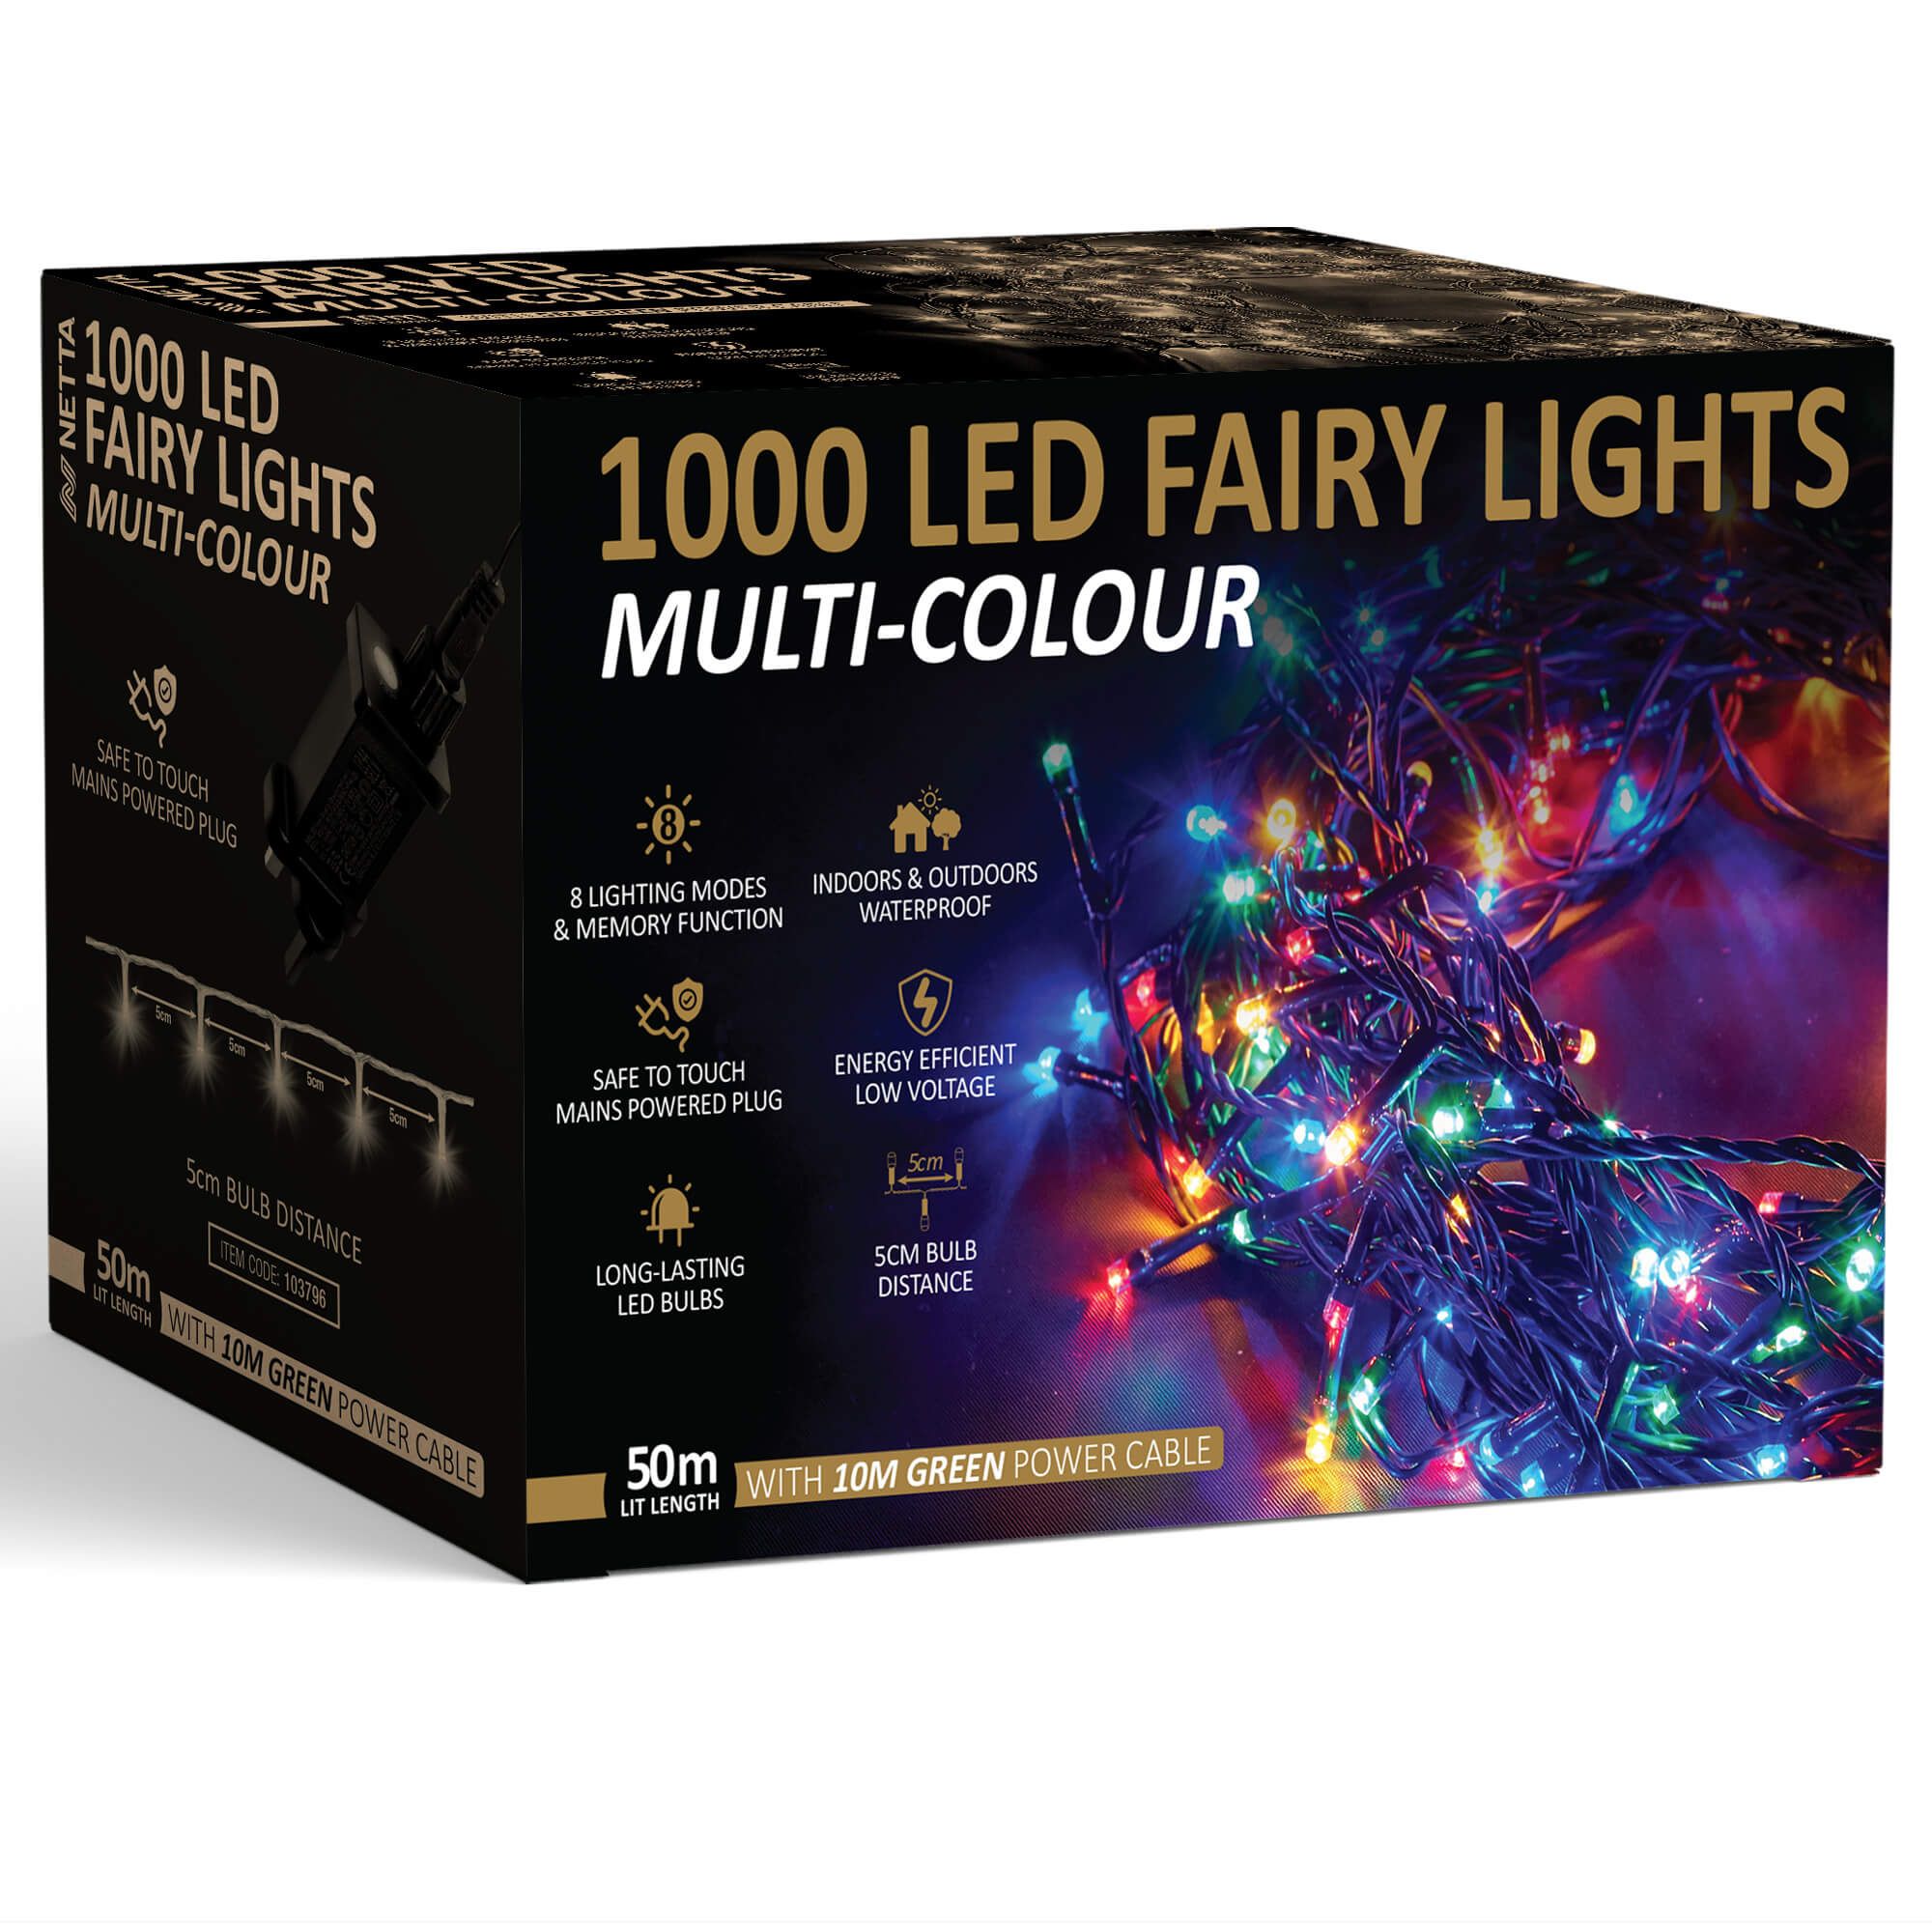 1000 LED Fairy Lights 50M Christmas Tree Lights Green Cable - Multi Colour